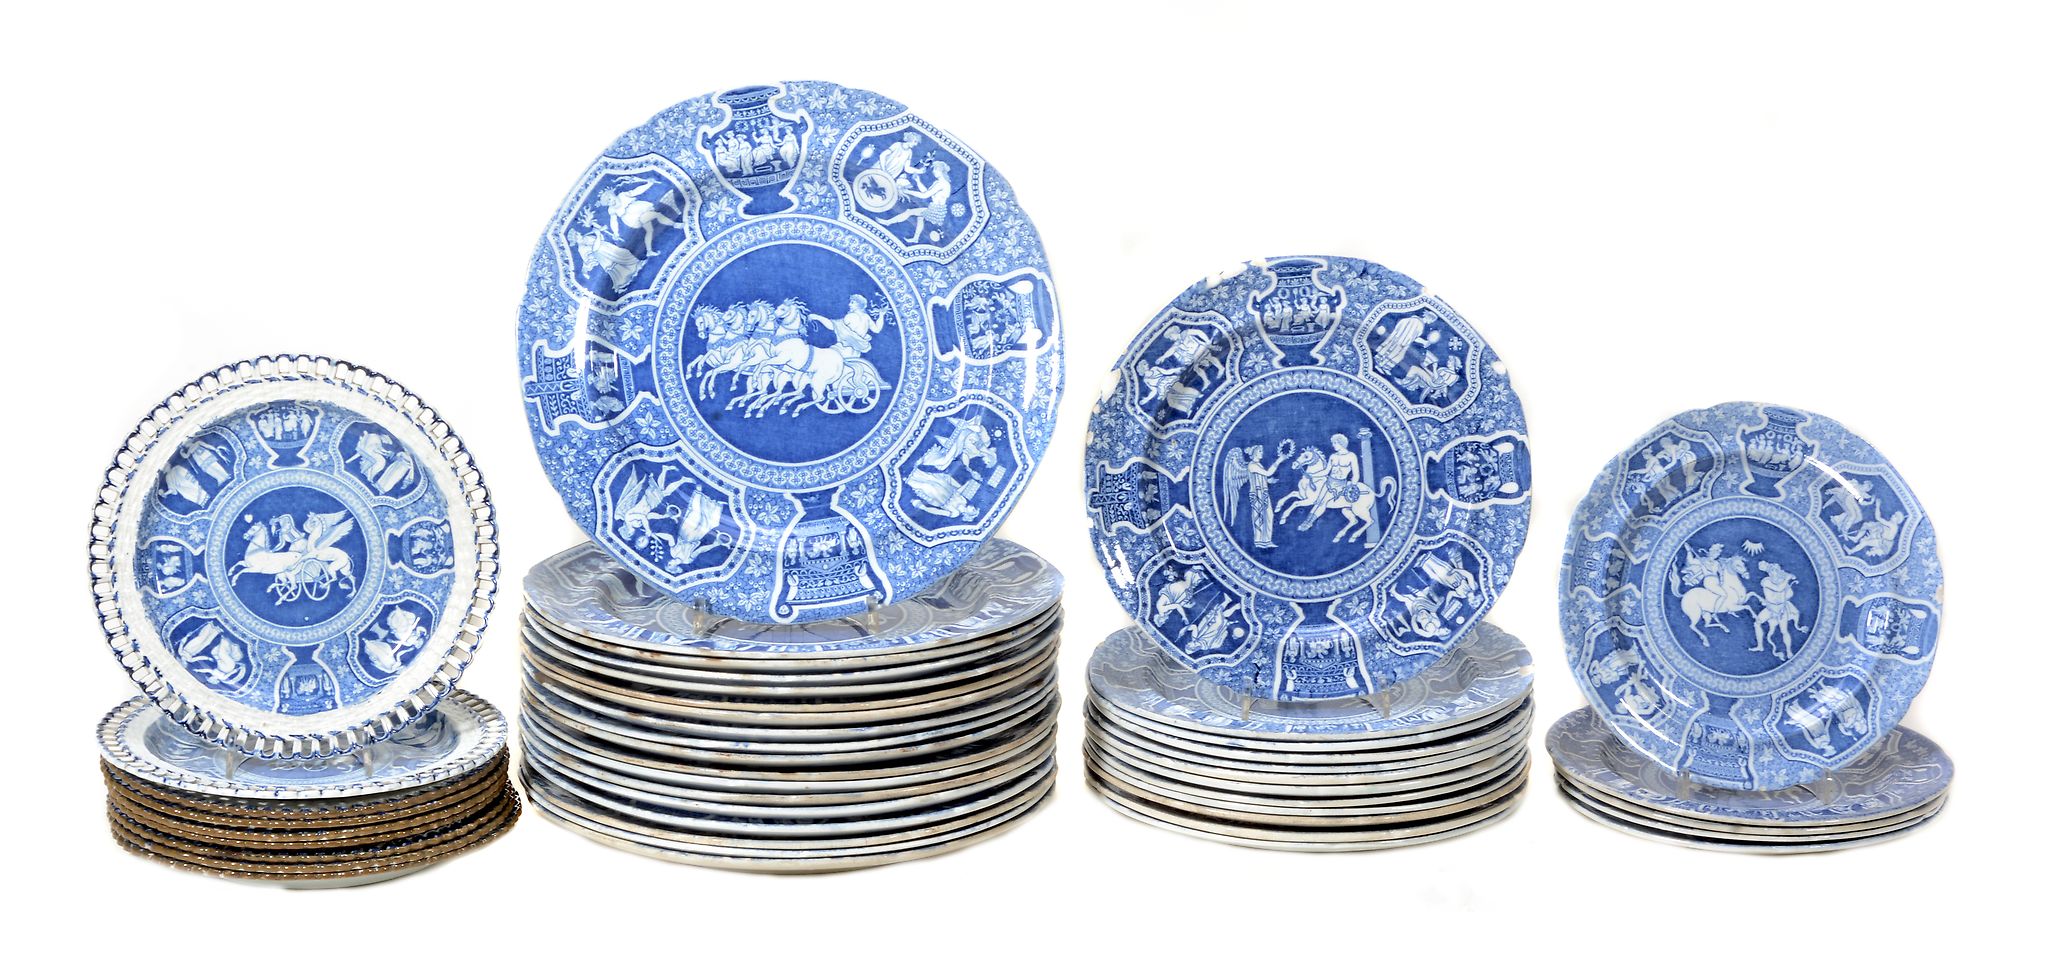 An assortment of English pearlware blue and white printed `Greek An assortment of English